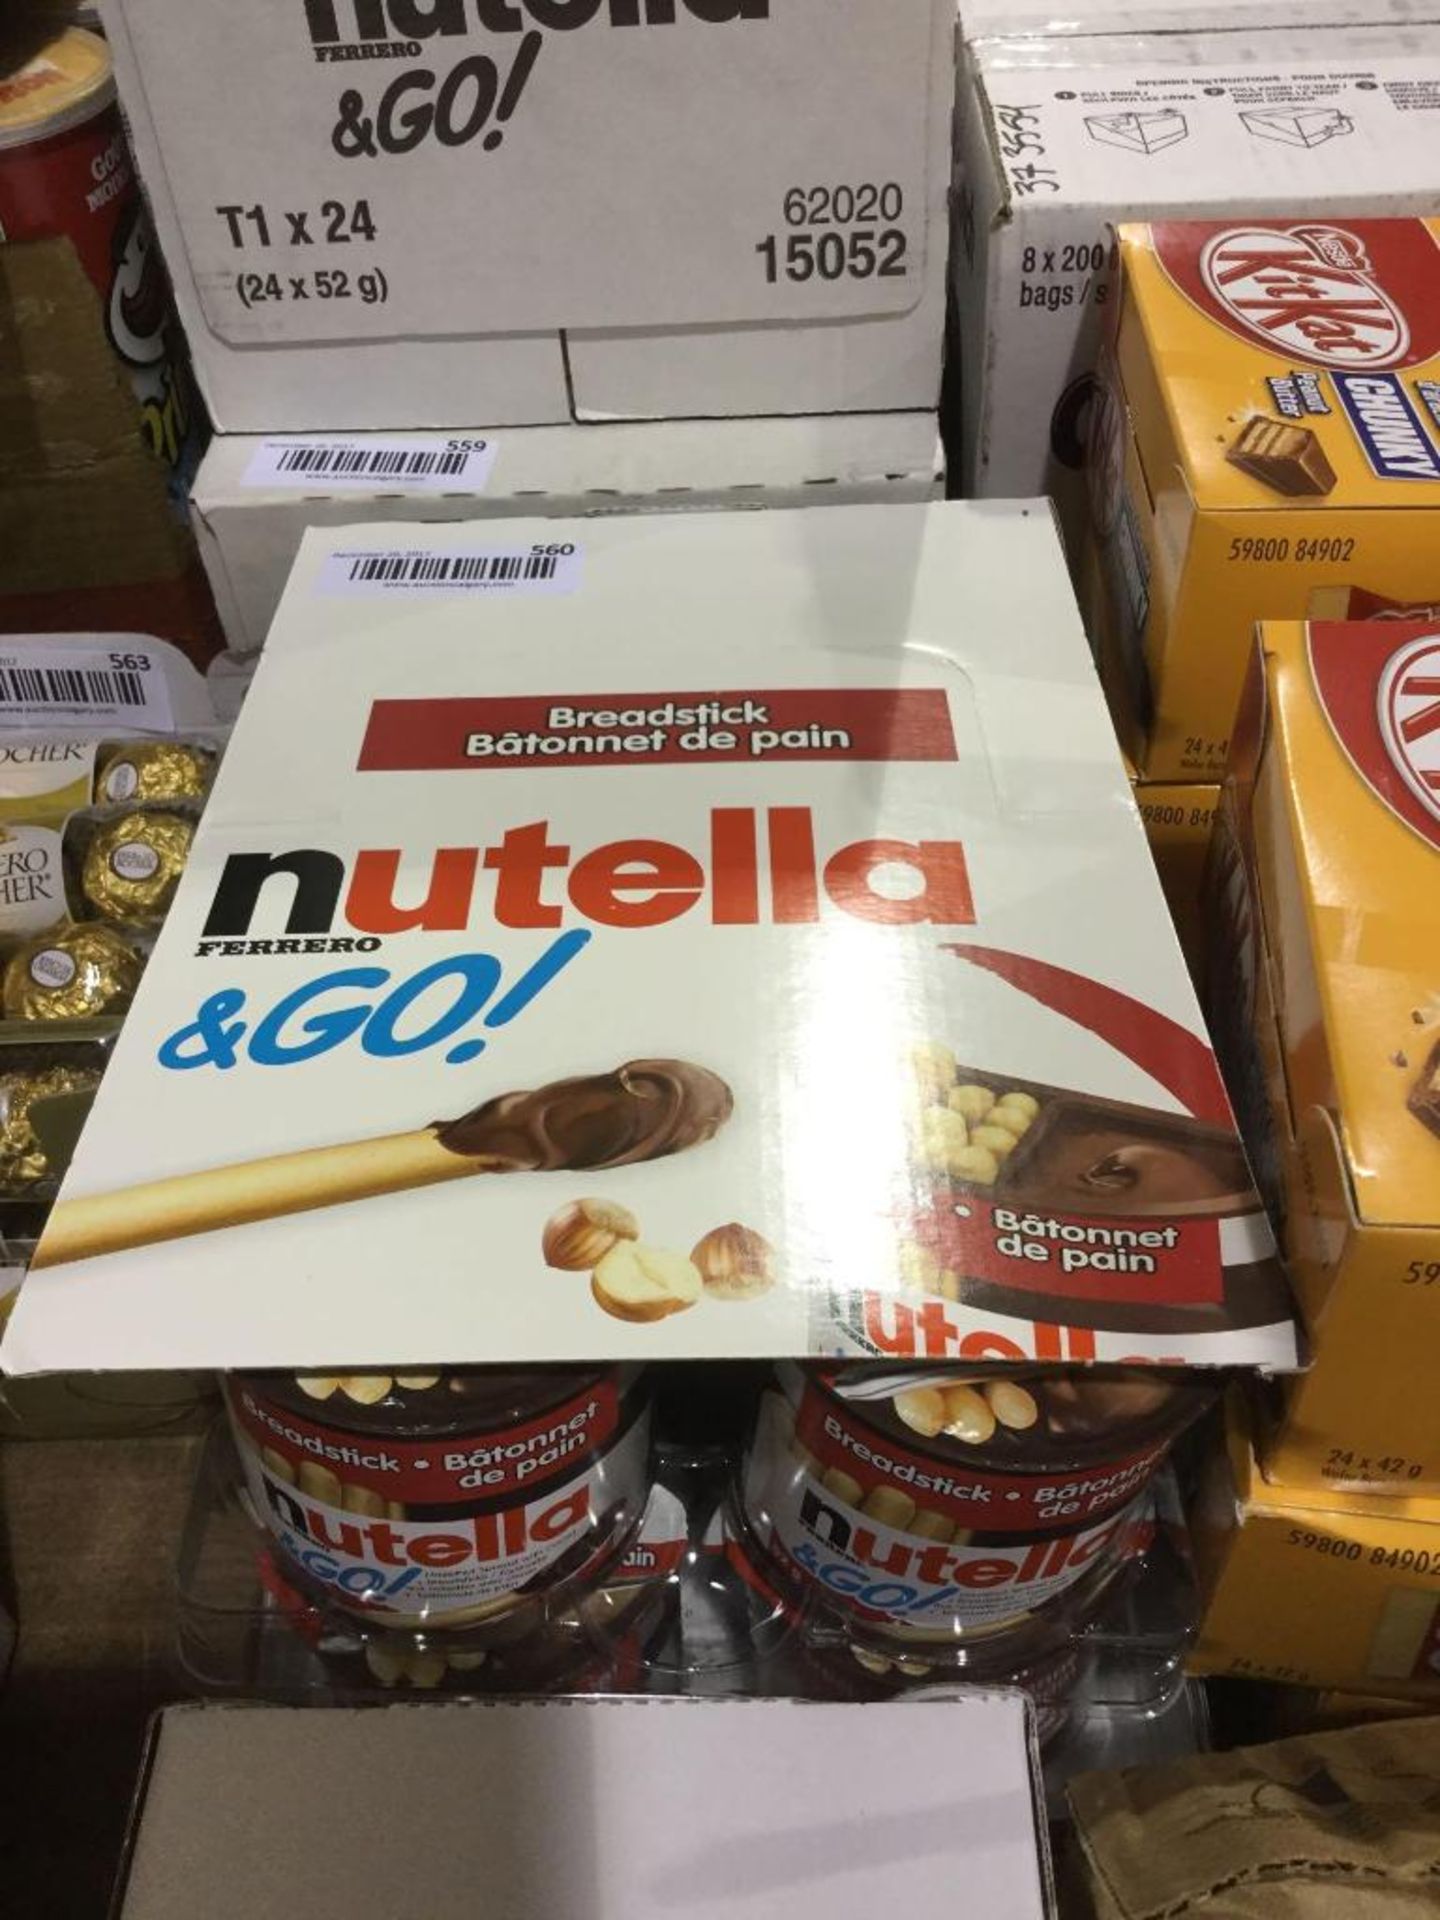 Case of 24 x 52 g Nutella to go